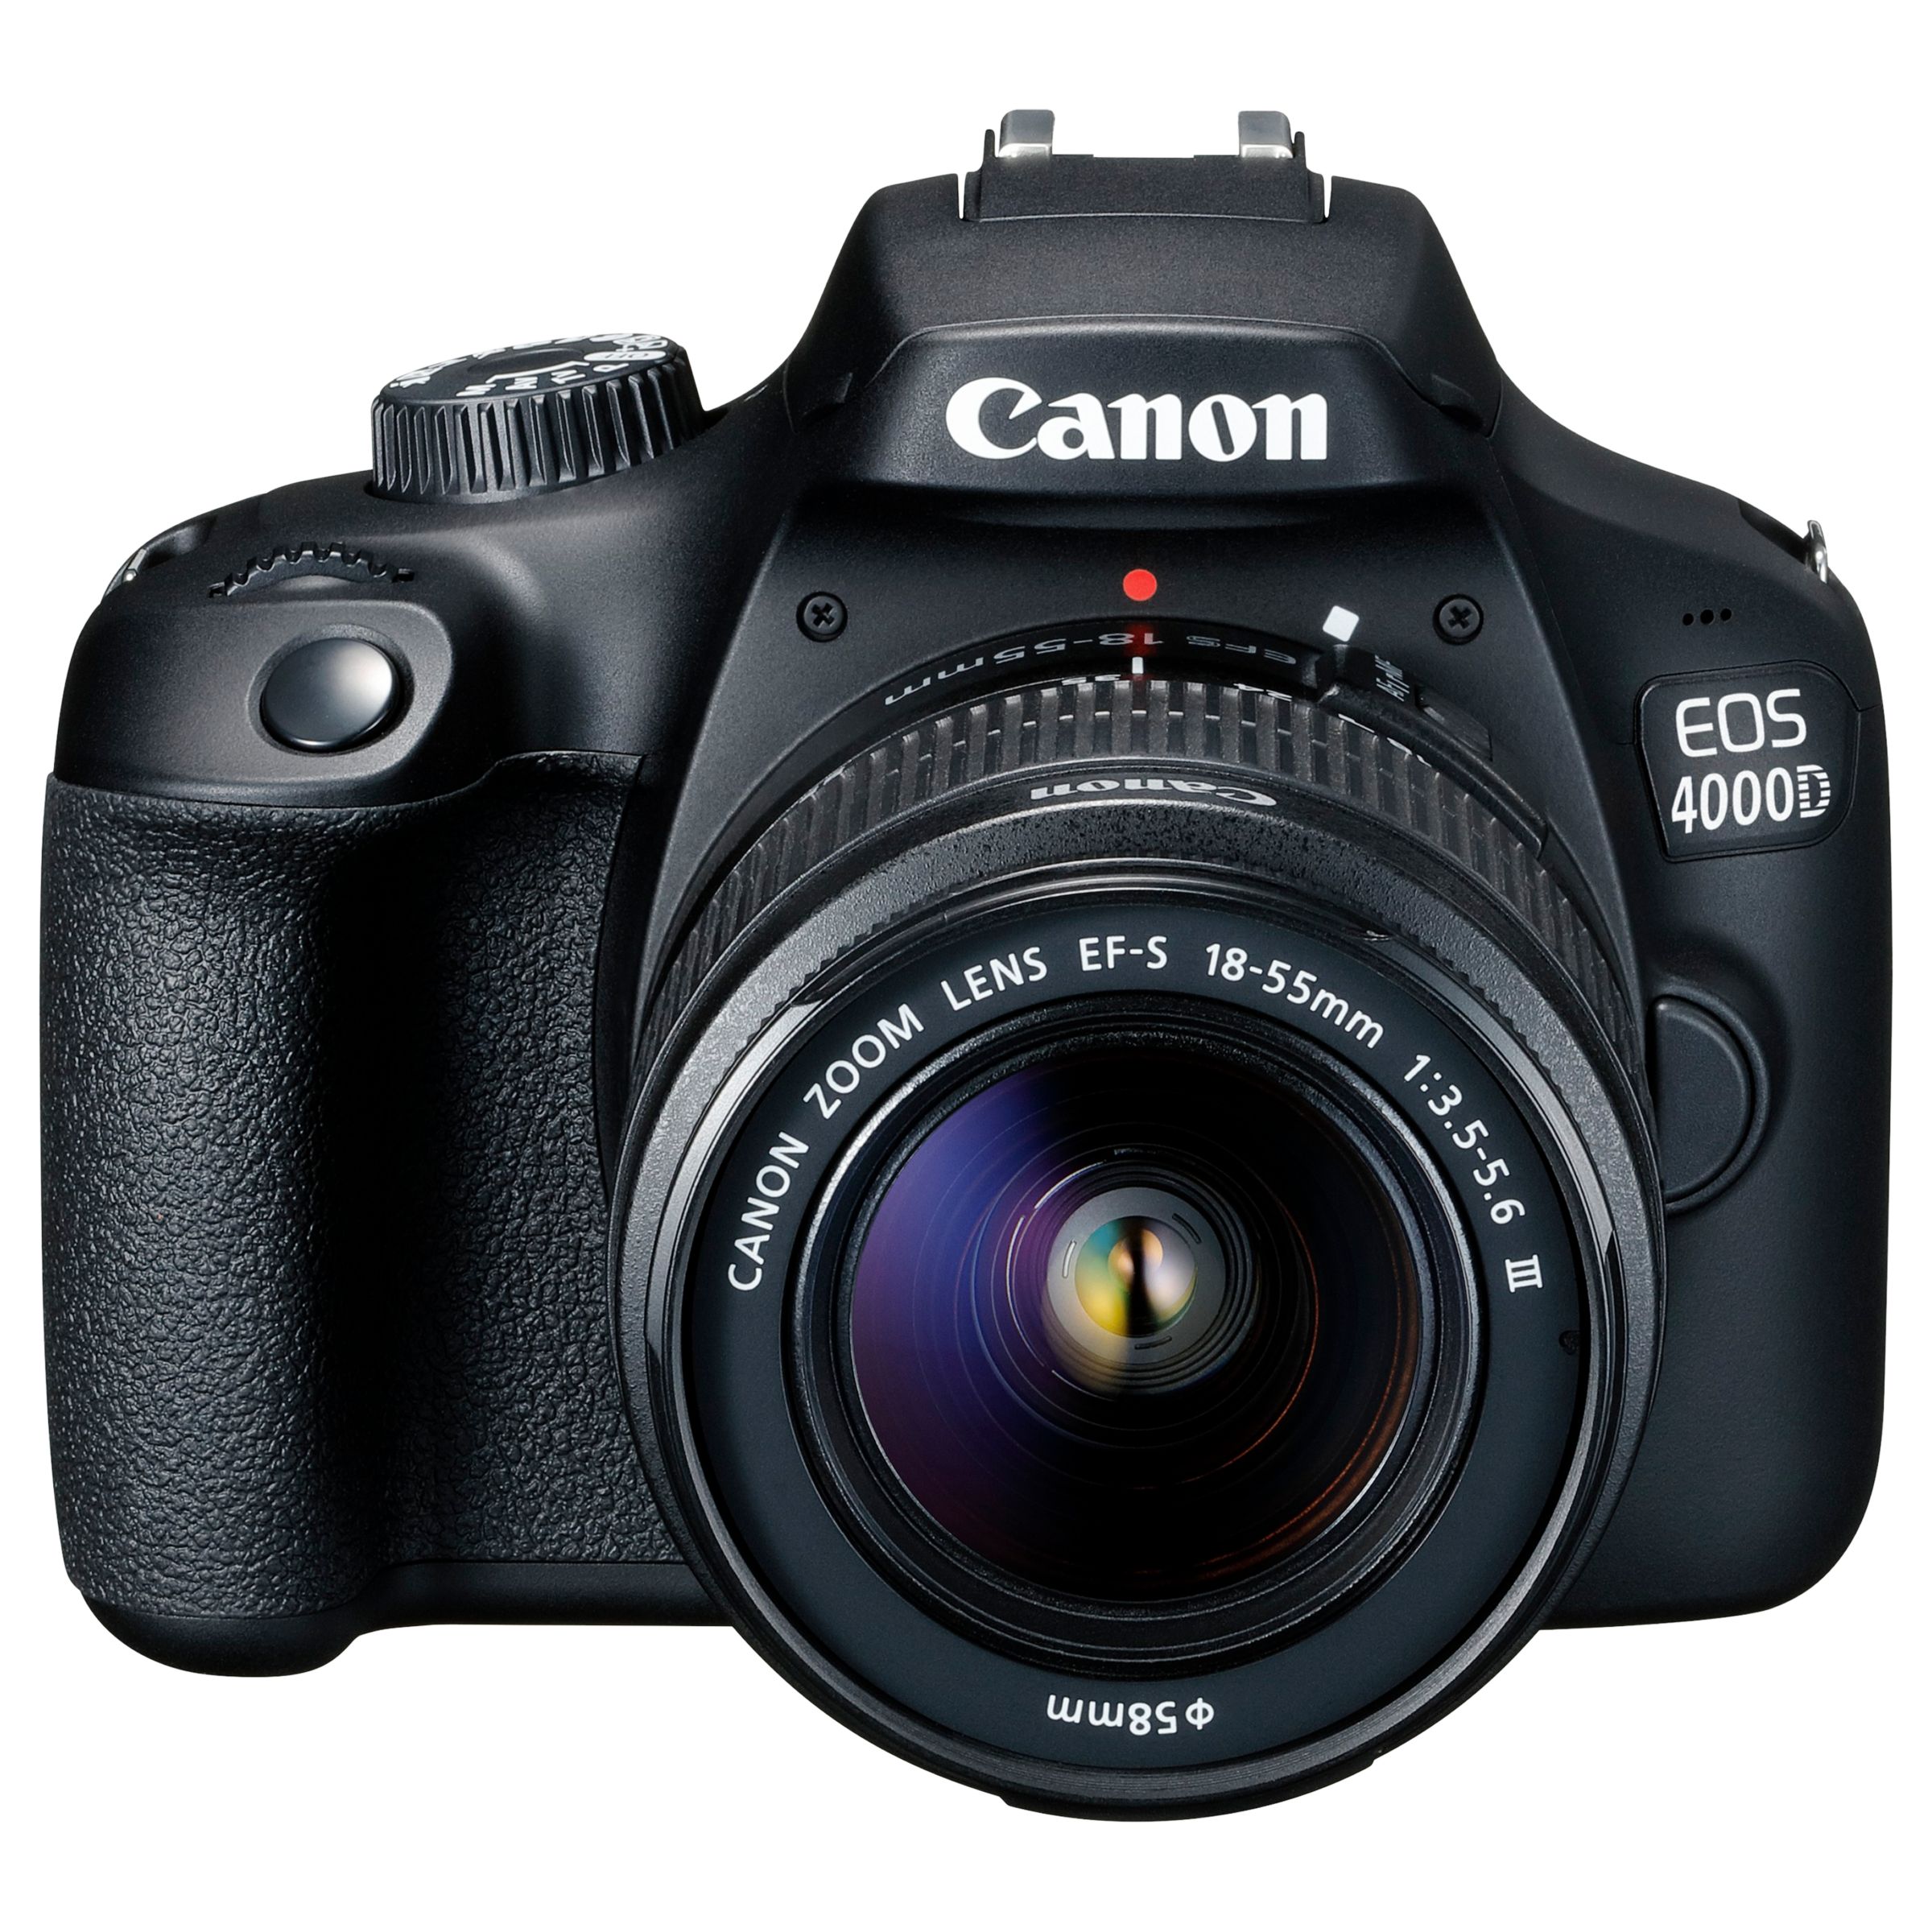 Canon EOS 4000D Digital SLR Camera with 18-55mm f/3.5-5.6 Lens, 1080p Full HD, 18MP, Wi-Fi, Optical Viewfinder, 2.7 LCD Screen, Black